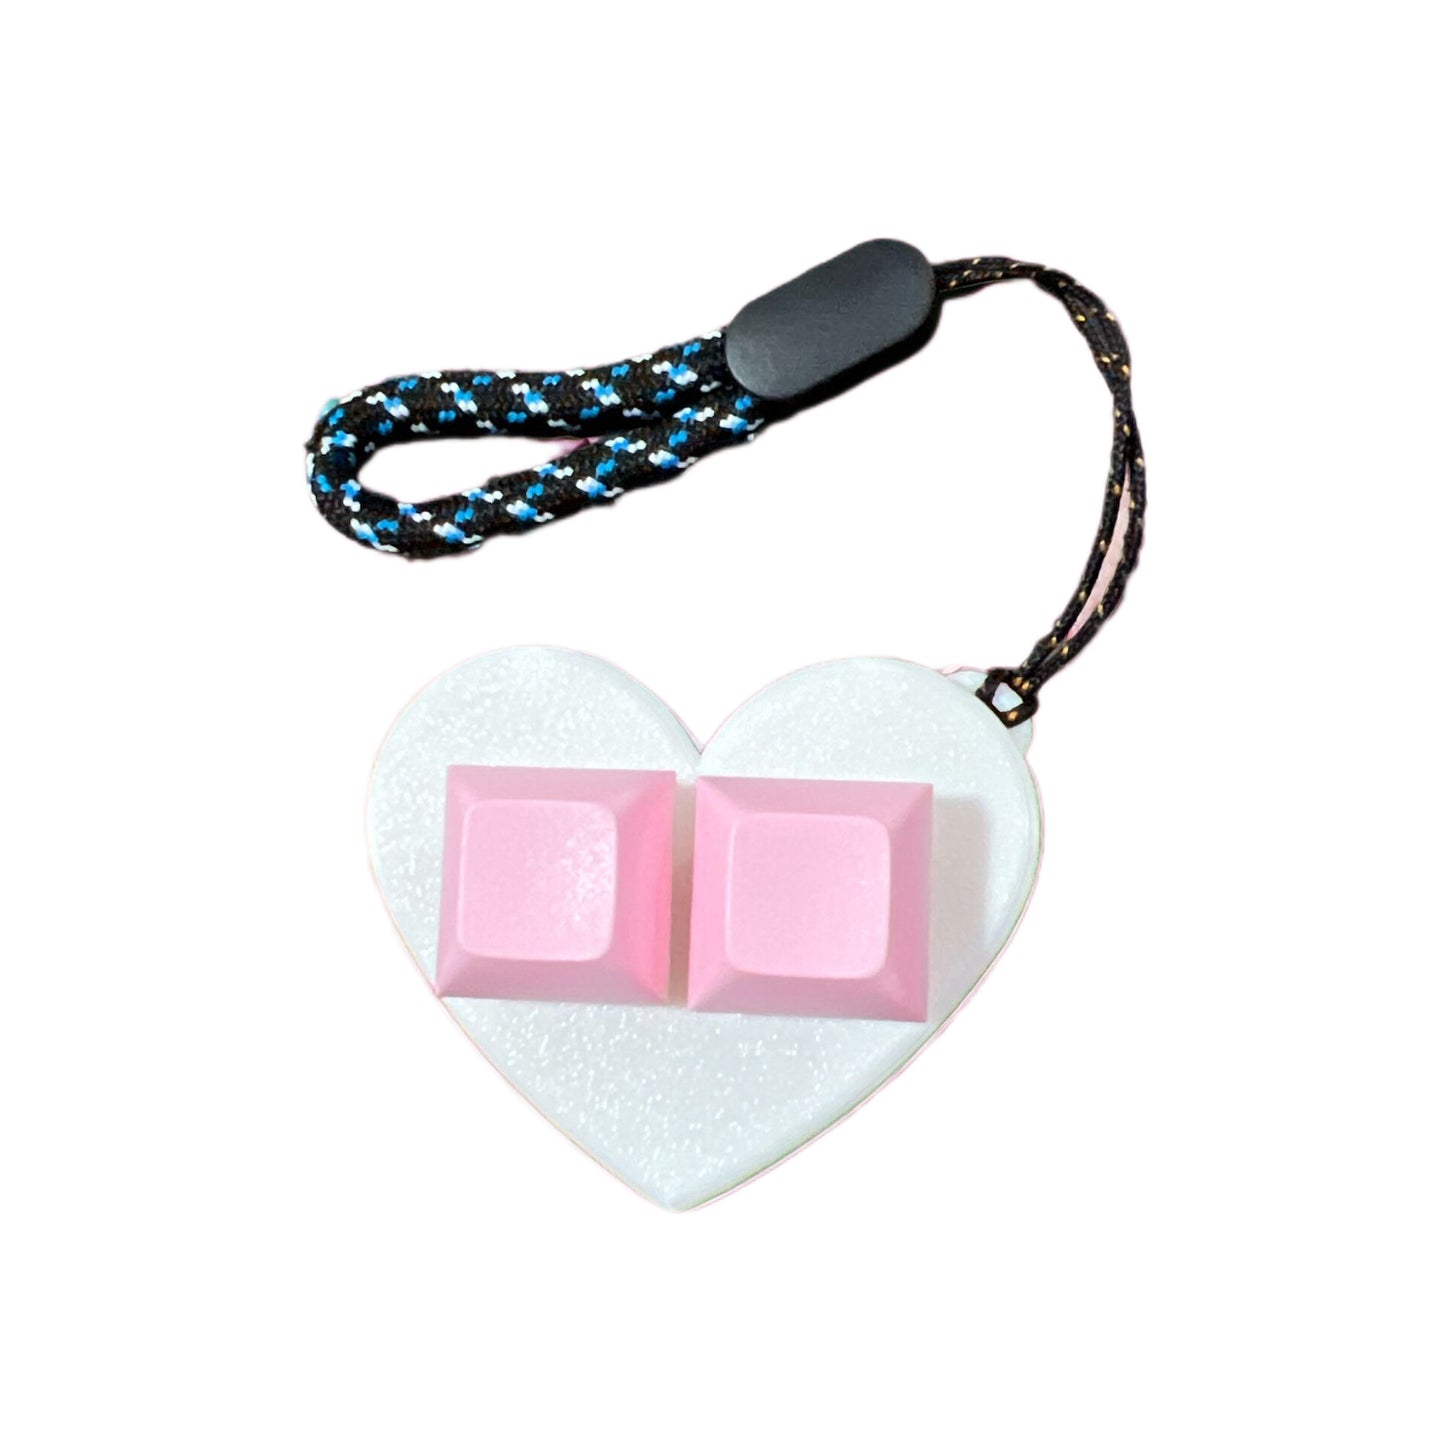 It's a 3D heart-shaped finger fidget. With keyboard keys to keep your fingers busy and it is on a keychain and it's white with pink keys.